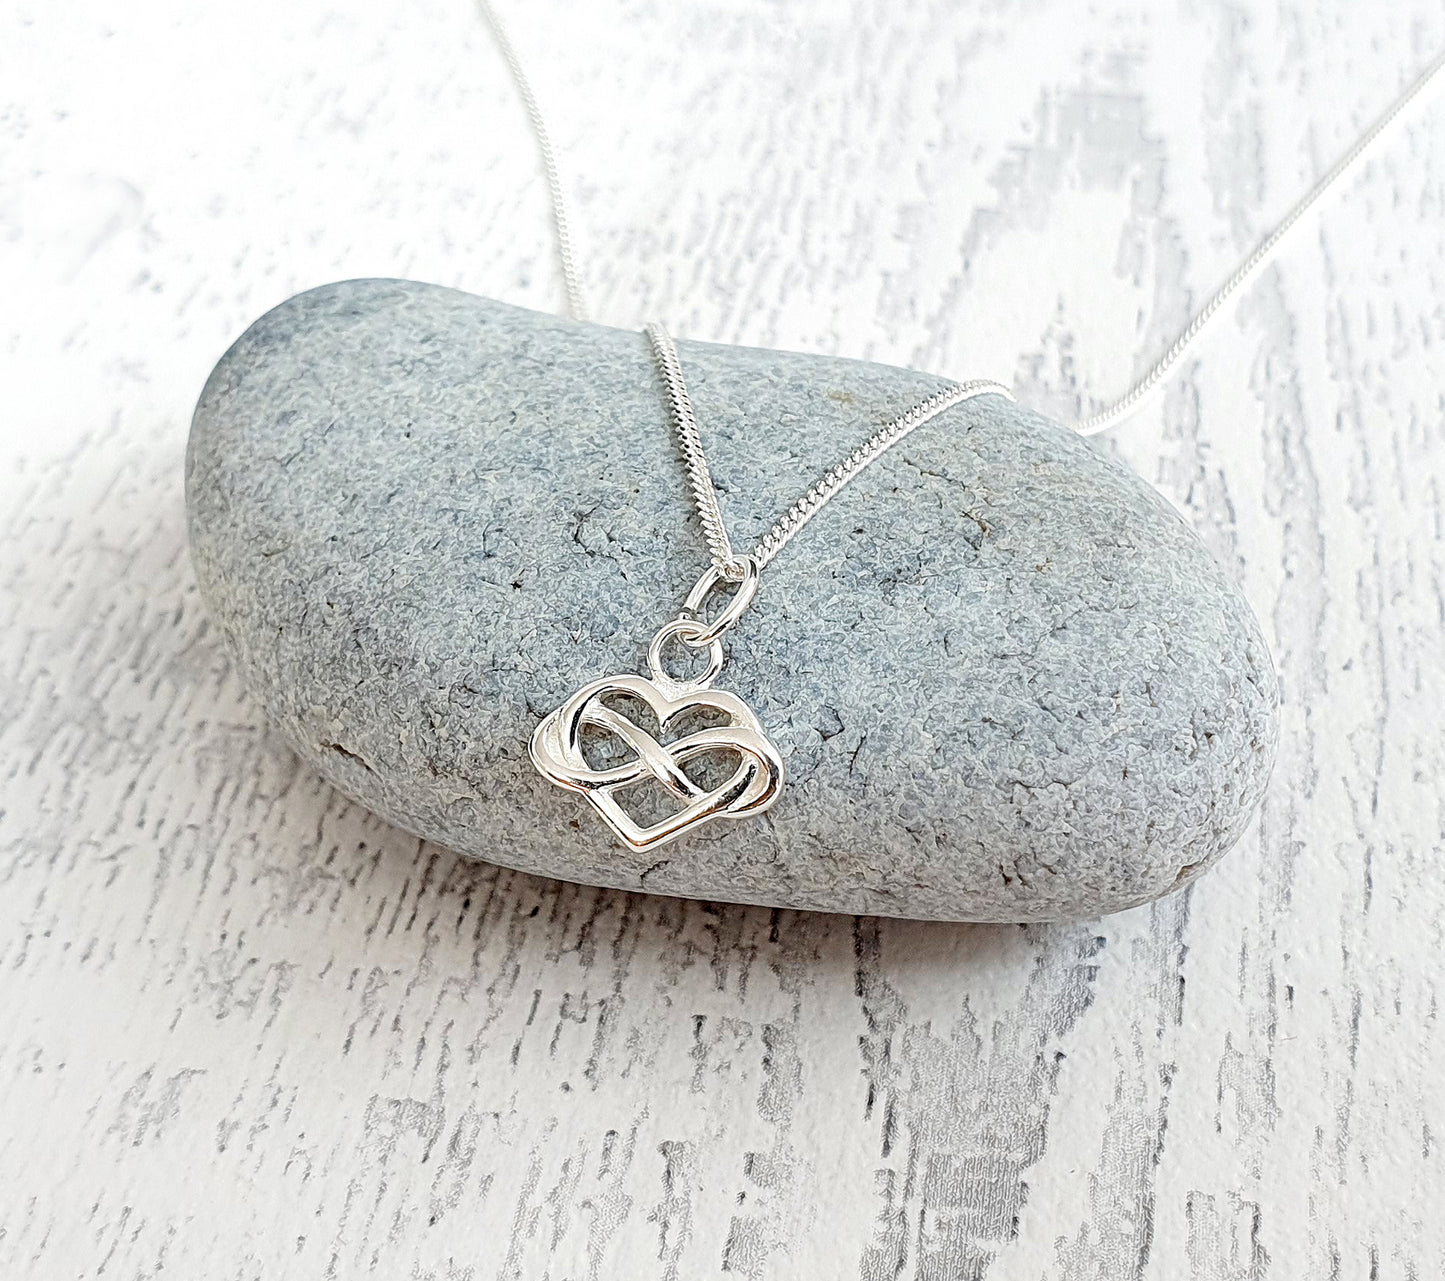 Godmother Infinity Heart Necklace in Sterling Silver 925, Personalised Gift